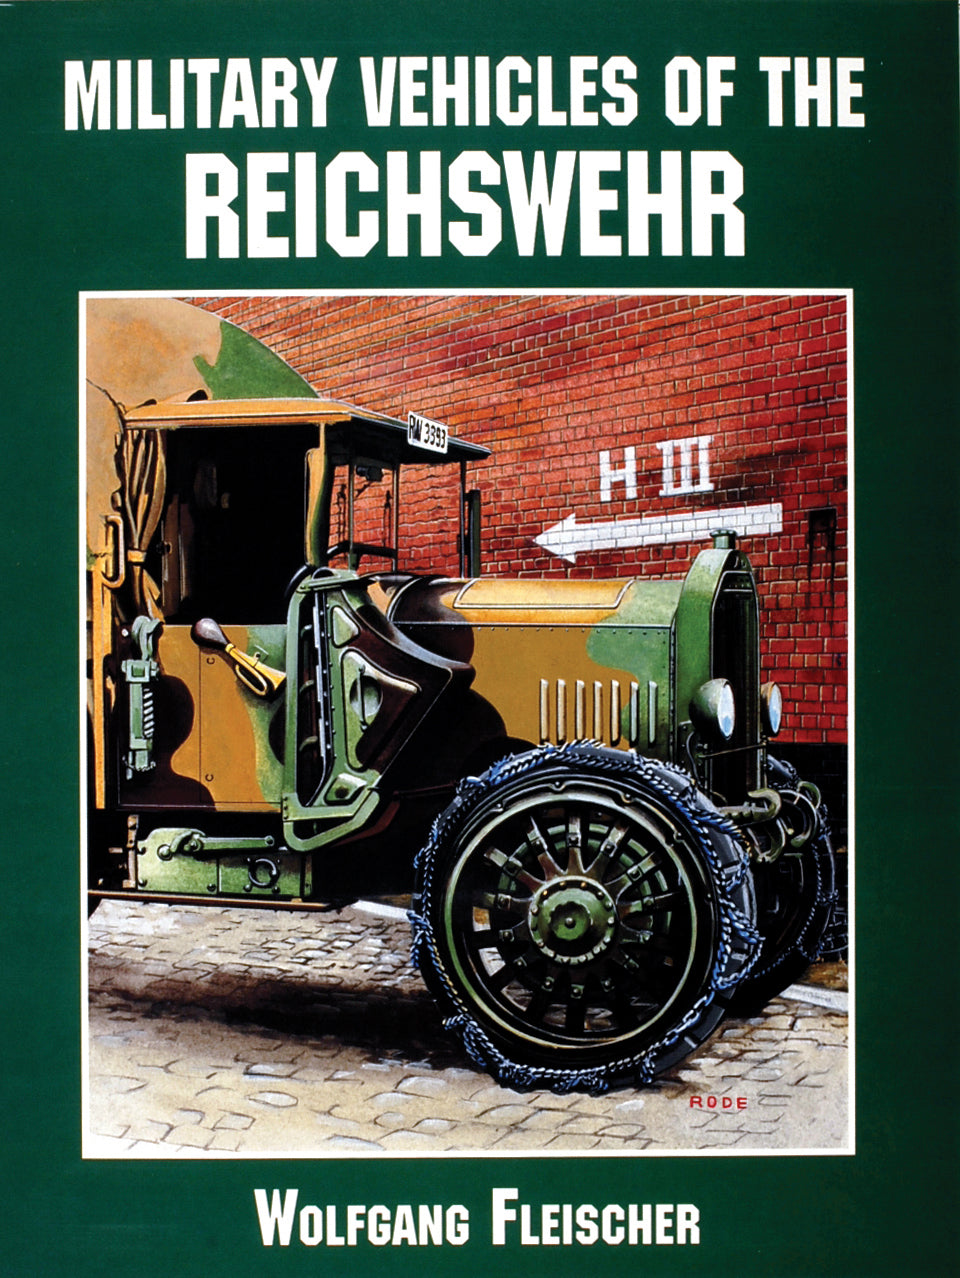 Military Vehicles of the Reichswehr